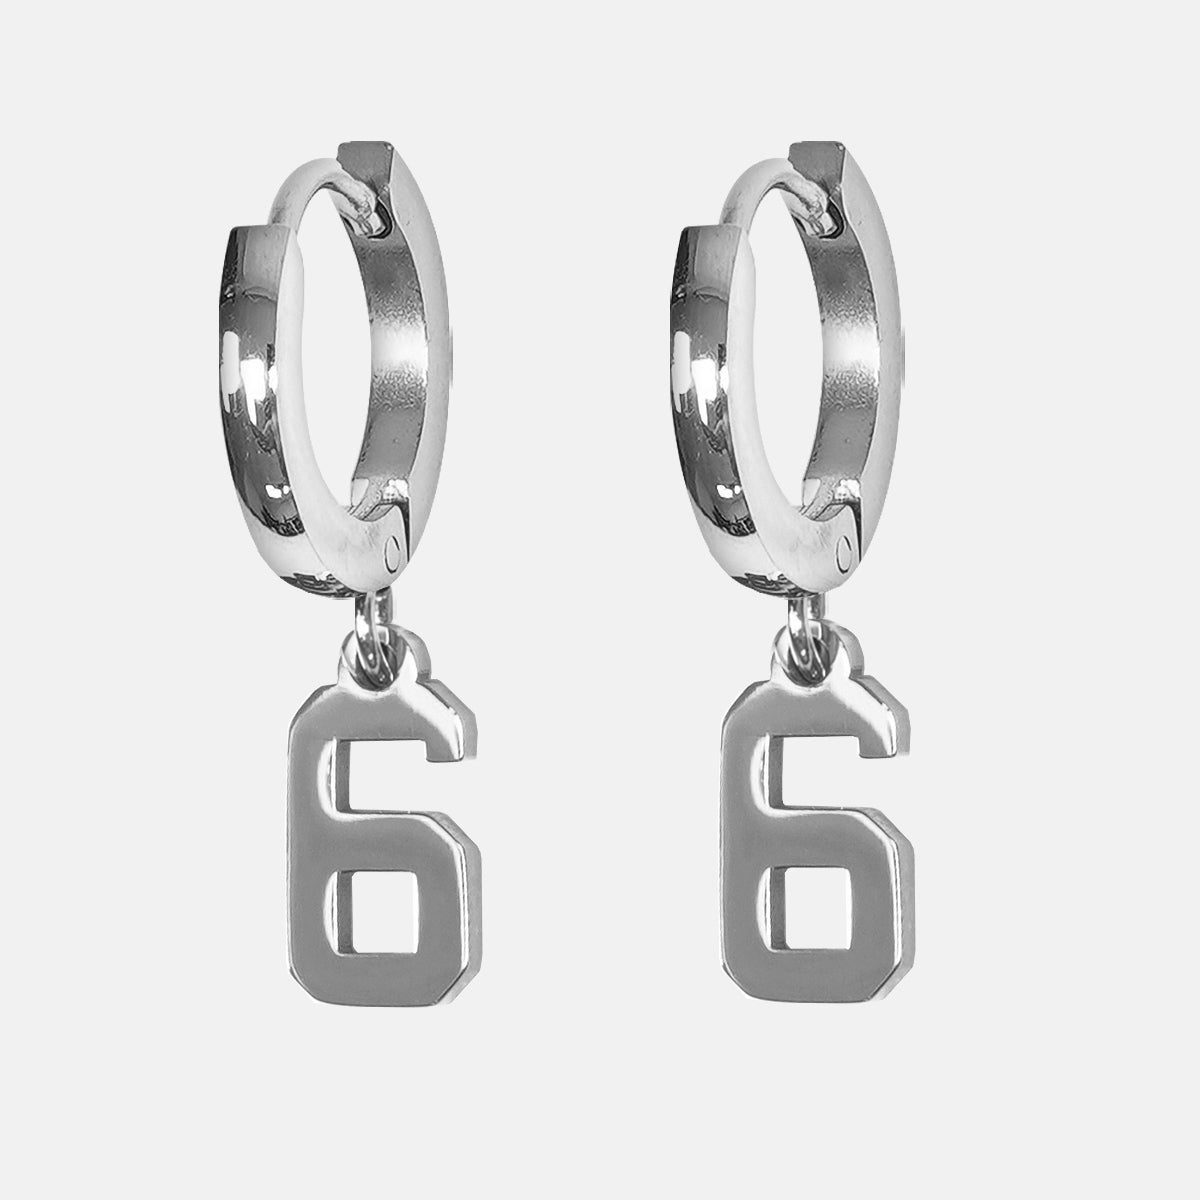 6 Number Earring - Stainless Steel